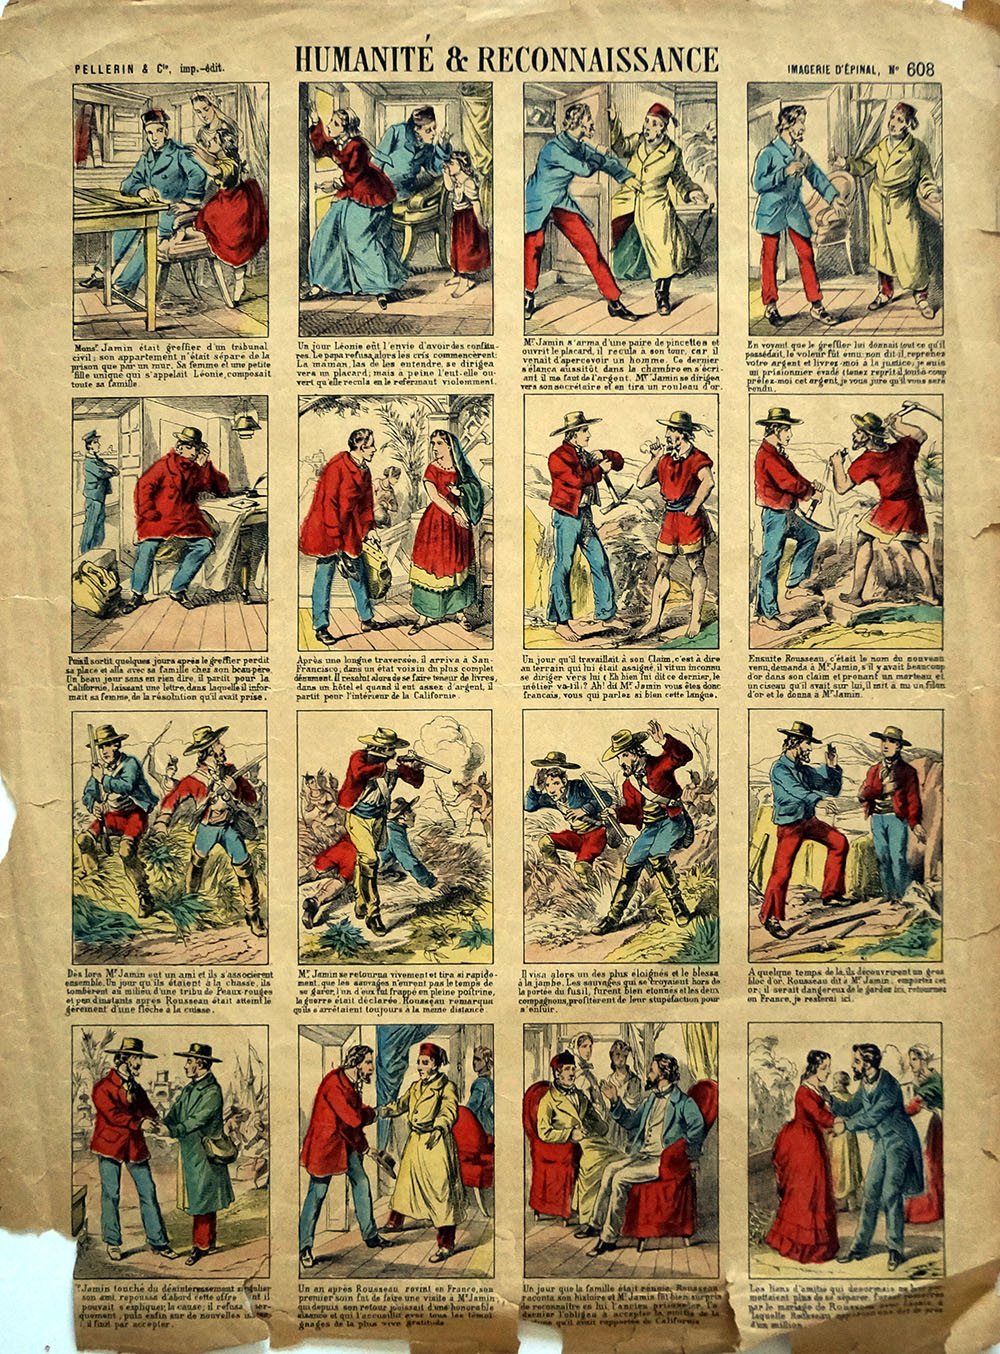 Imagerie dEpinal Humanit & Reconnaissance art by EARLY FRENCH original comic strips from 1888 at The Illustration Art Gallery